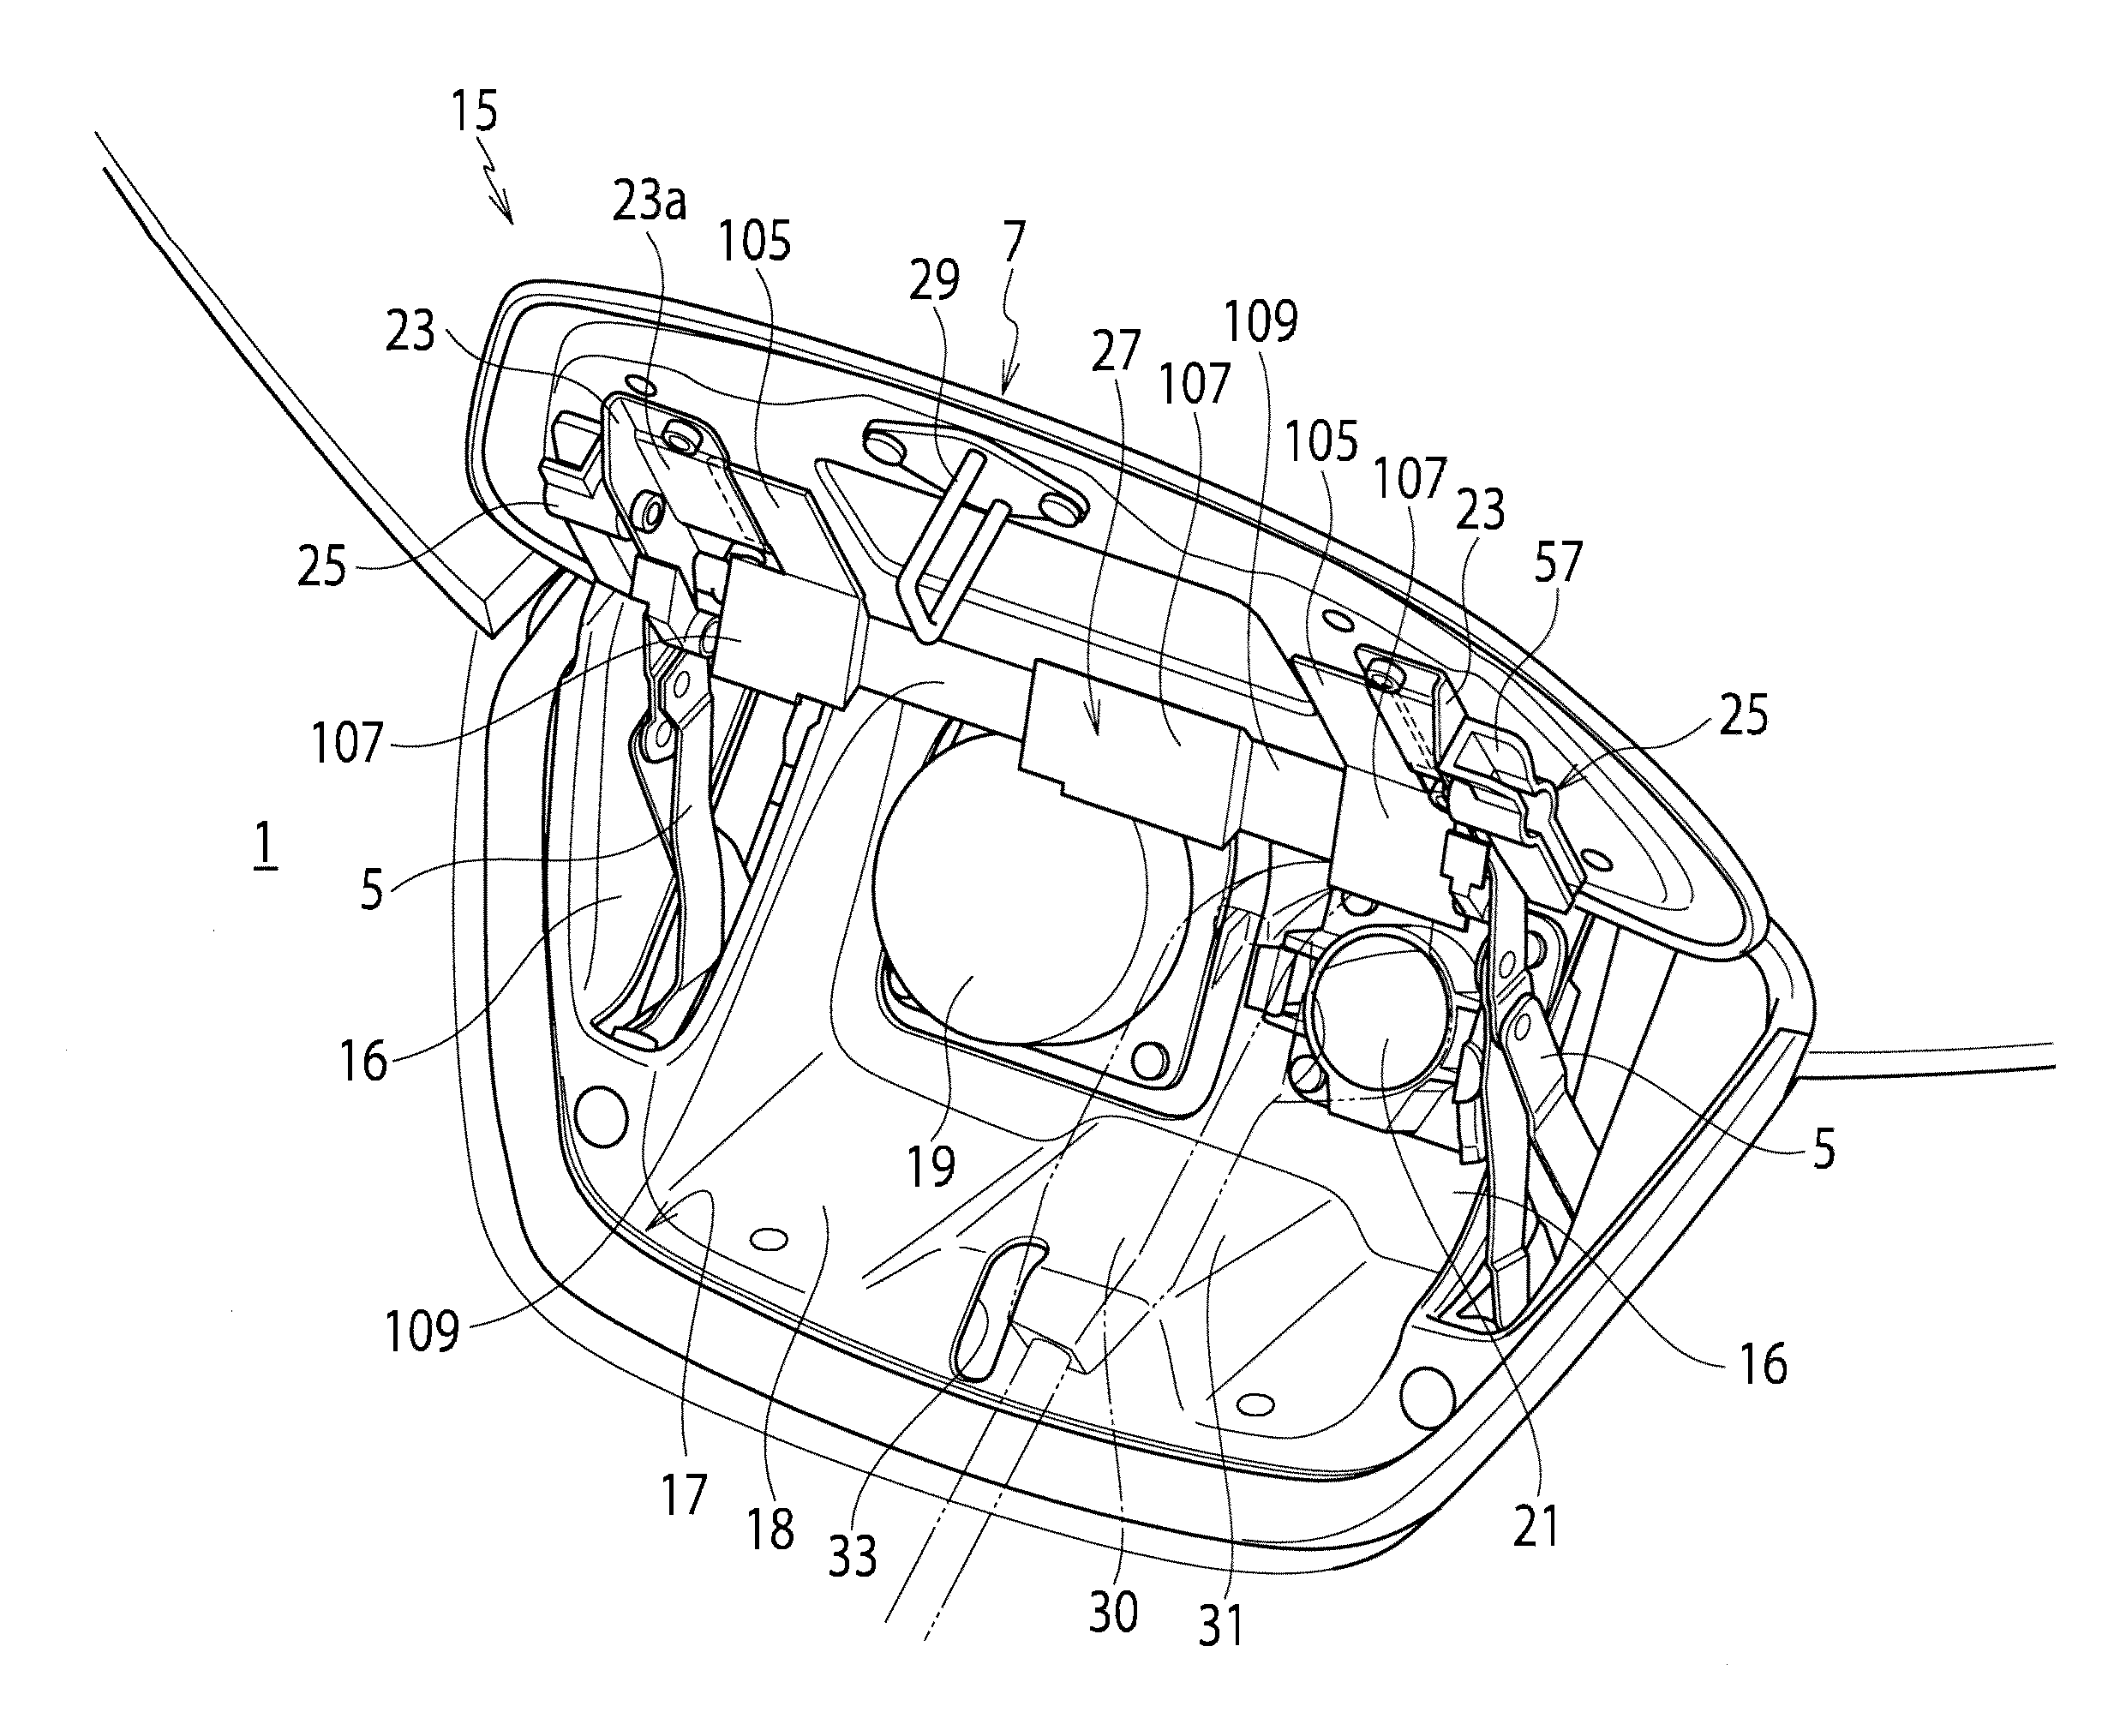 Arrangement structure for charging port cover